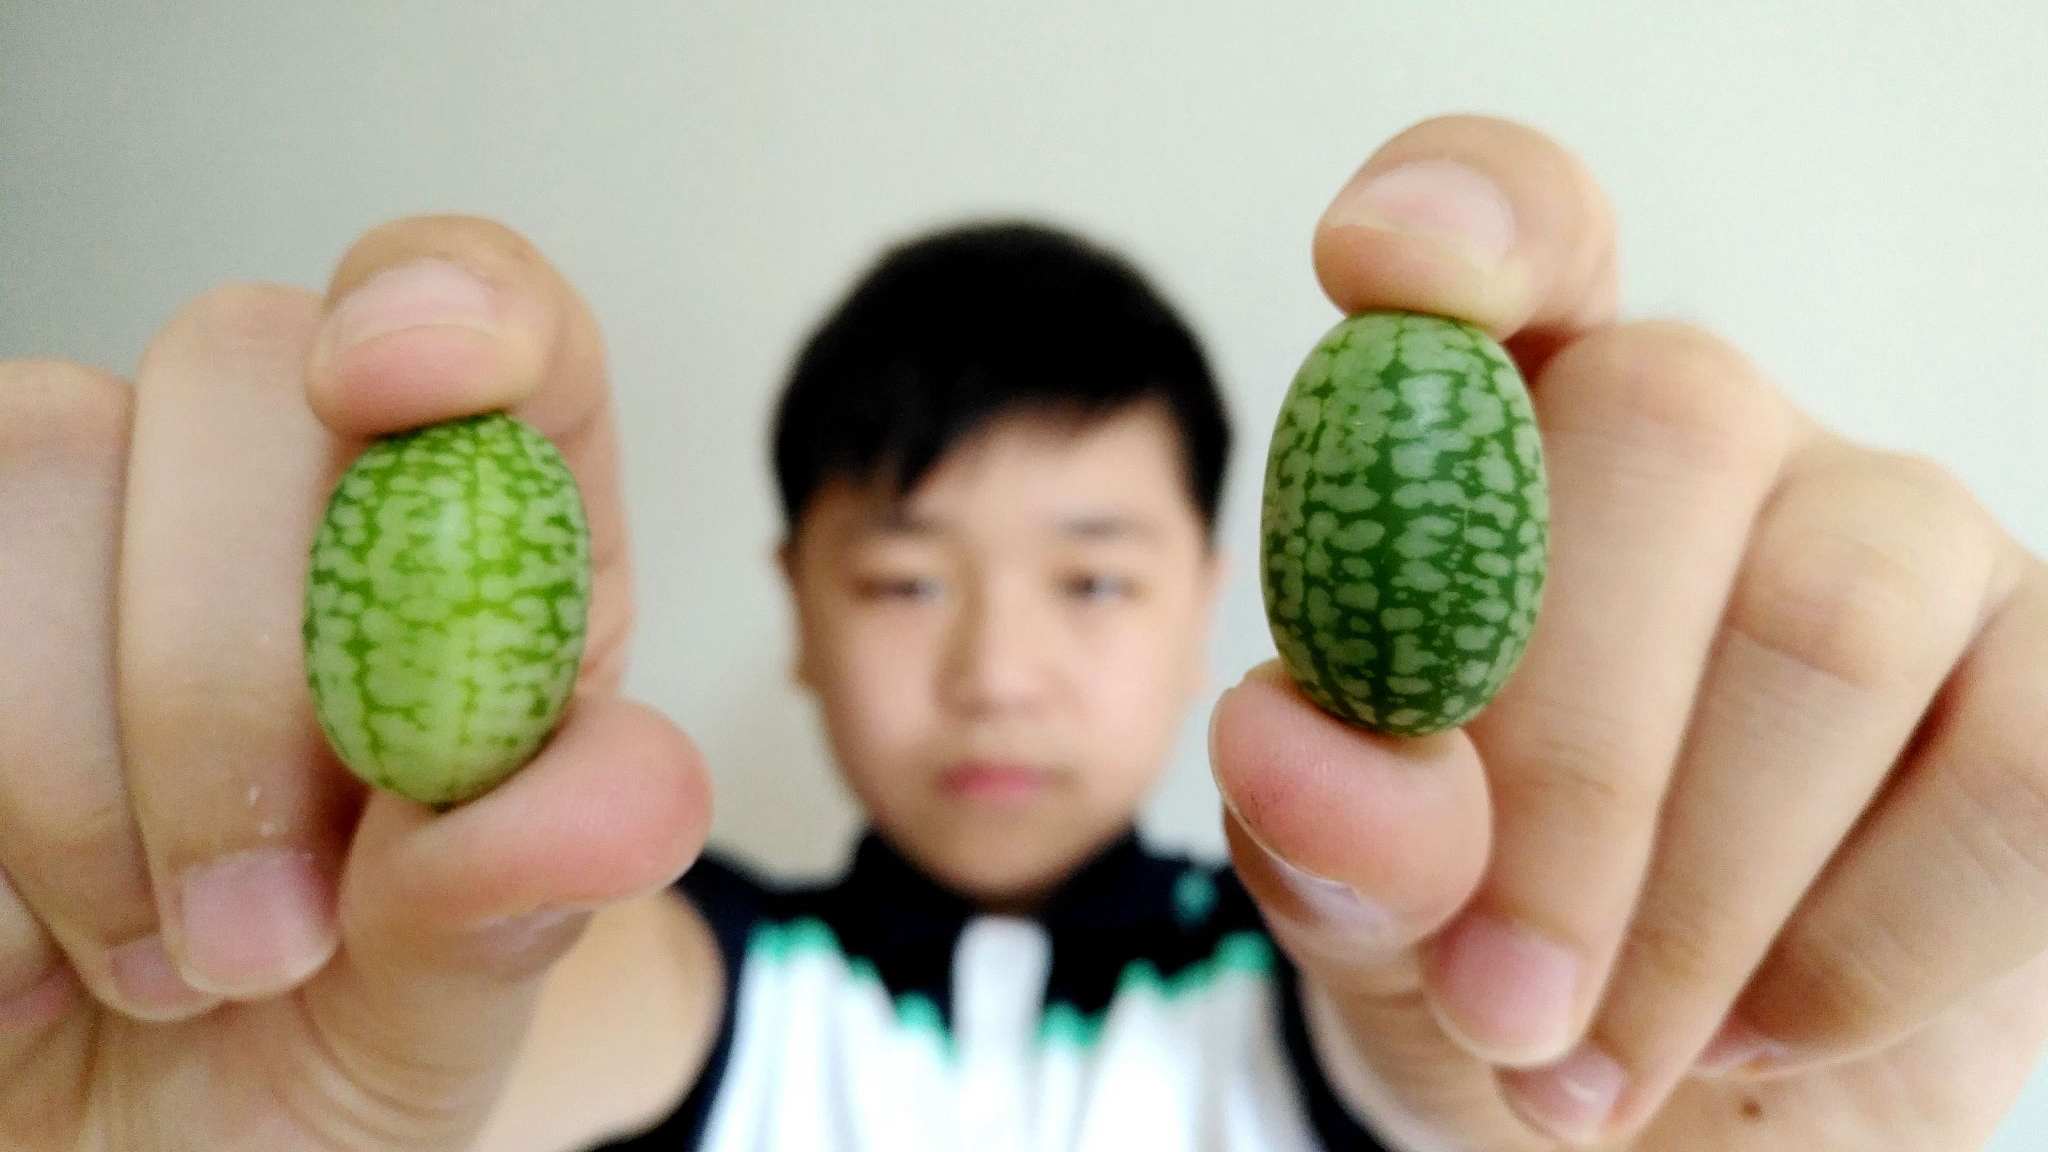 Want to try this thumb-sized watermelon?